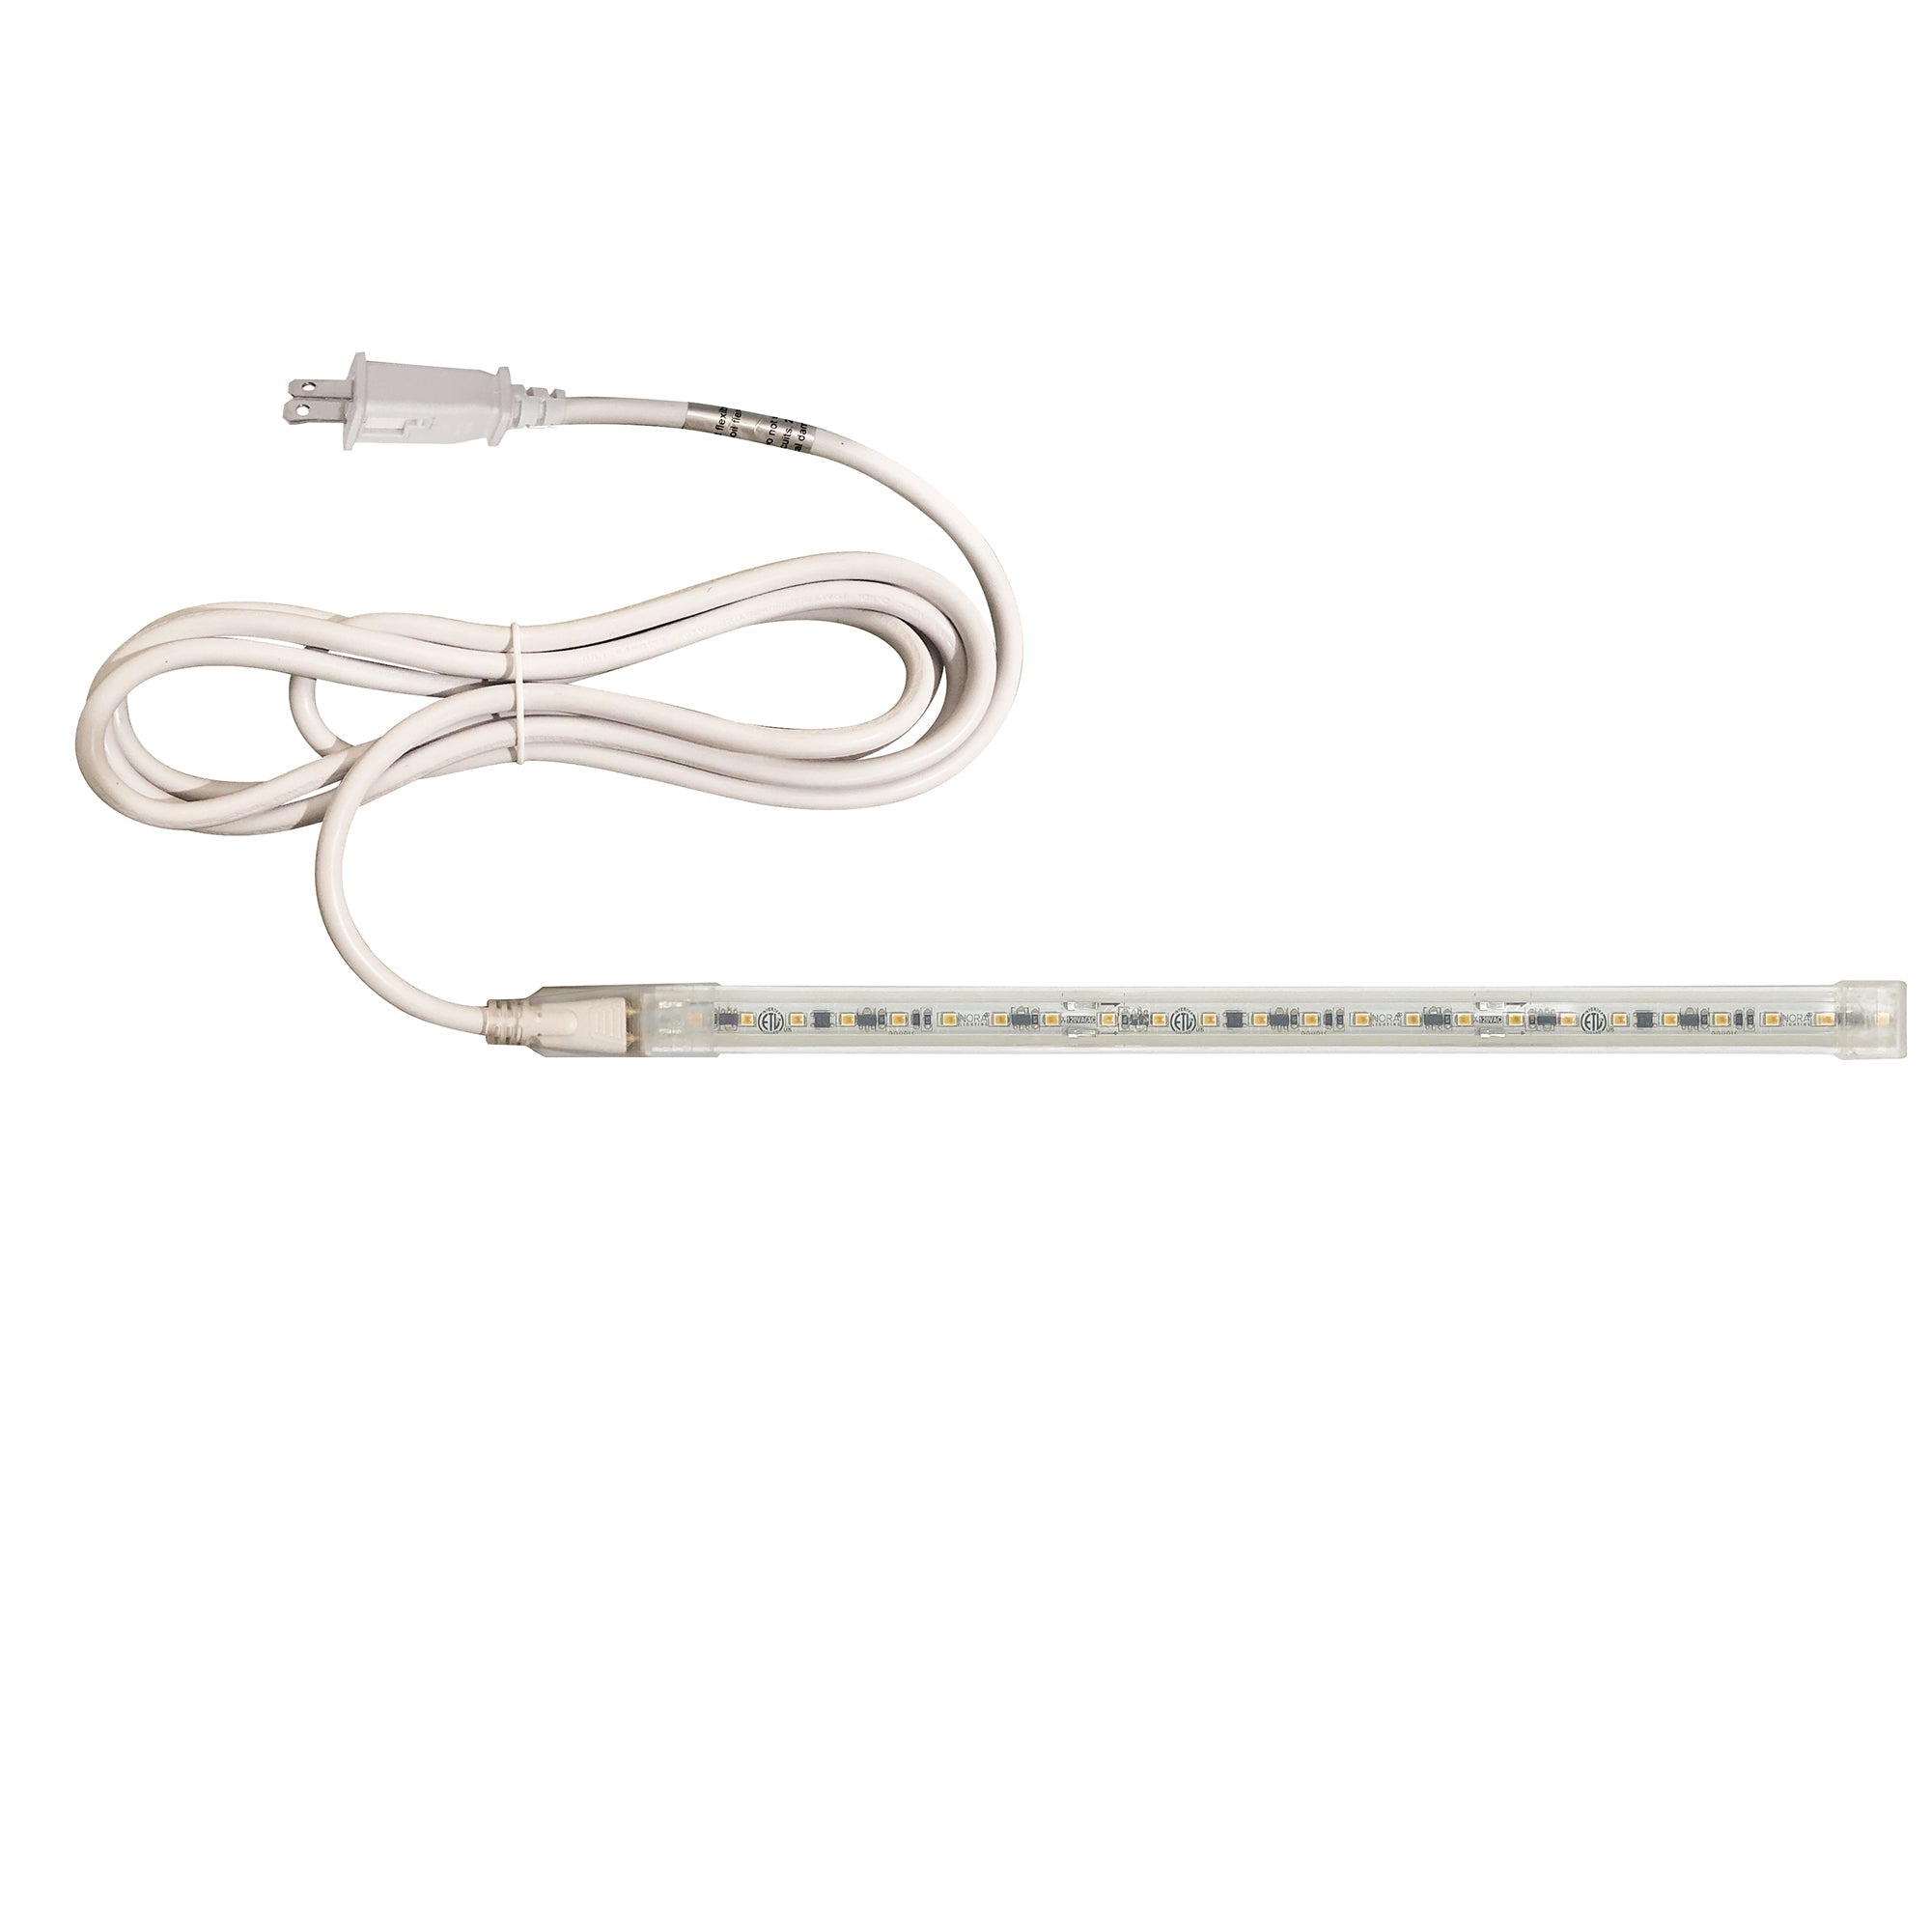 Nora Lighting NUTP13-W75-12-930/CP - Accent / Undercabinet - Custom Cut 75-ft 120V Continuous LED Tape Light, 330lm / 3.6W per foot, 3000K, w/ Mounting Clips and 8' Cord & Plug